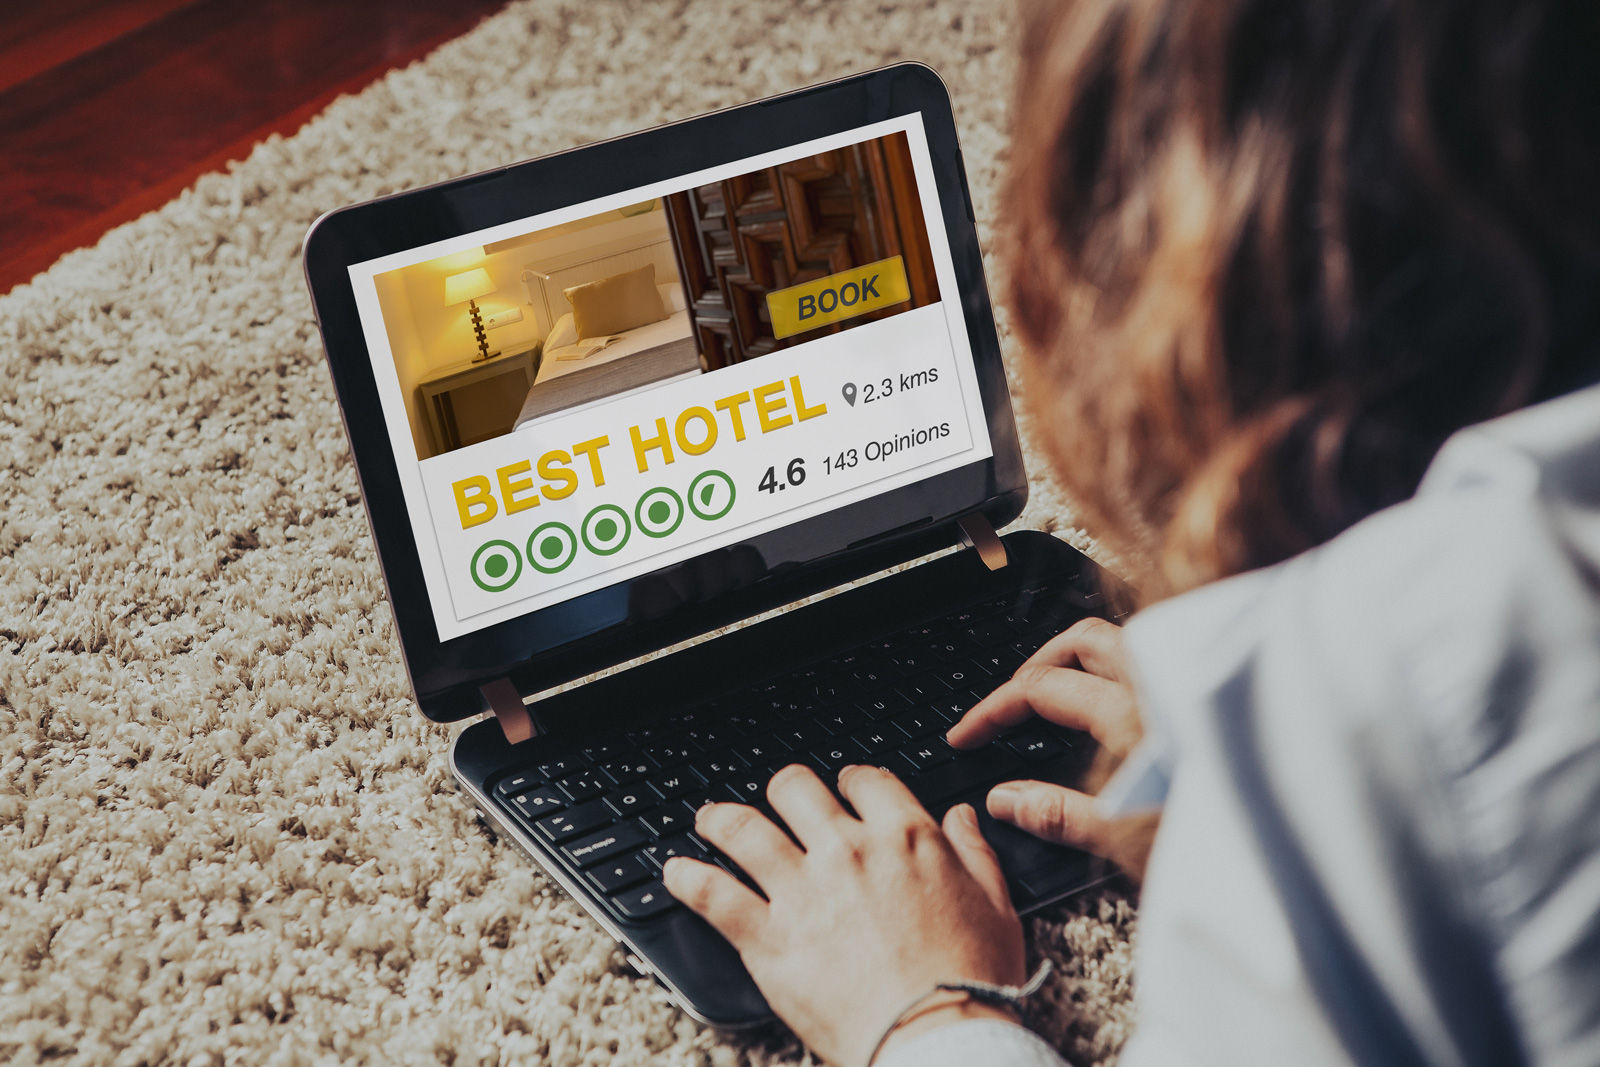 Learn to search Medicine Hat hotel reviews the right way. 